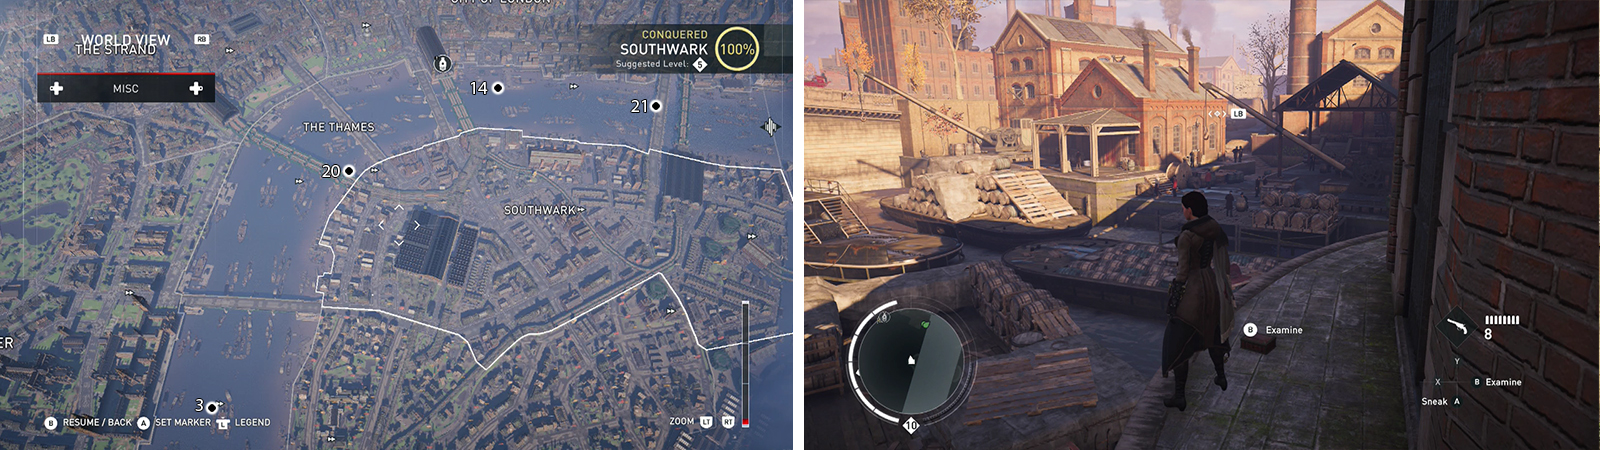 The Secrets of London can be found on the map (left). Location of Secret of London #21 pictured (right).